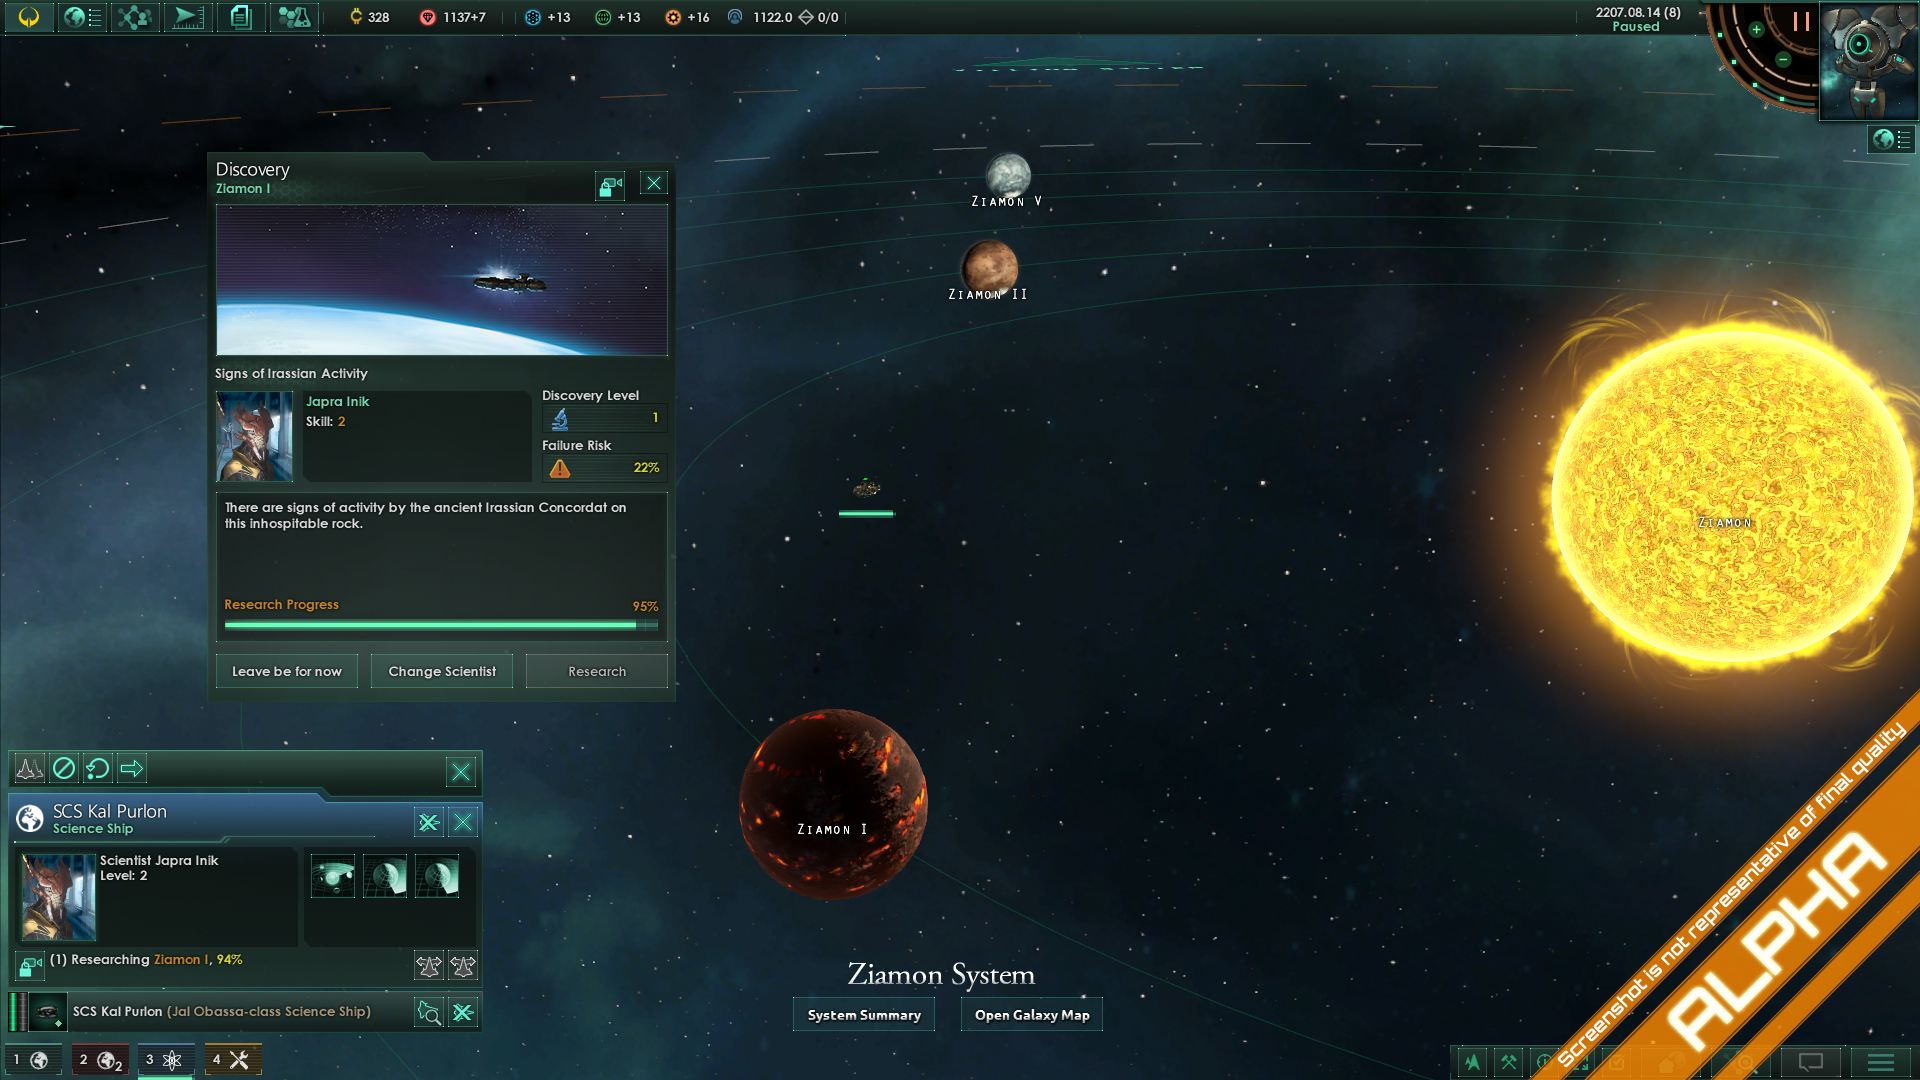 A screenshot of Stellaris from 2015, showing a solar system and menu screens of the Ziamon System.